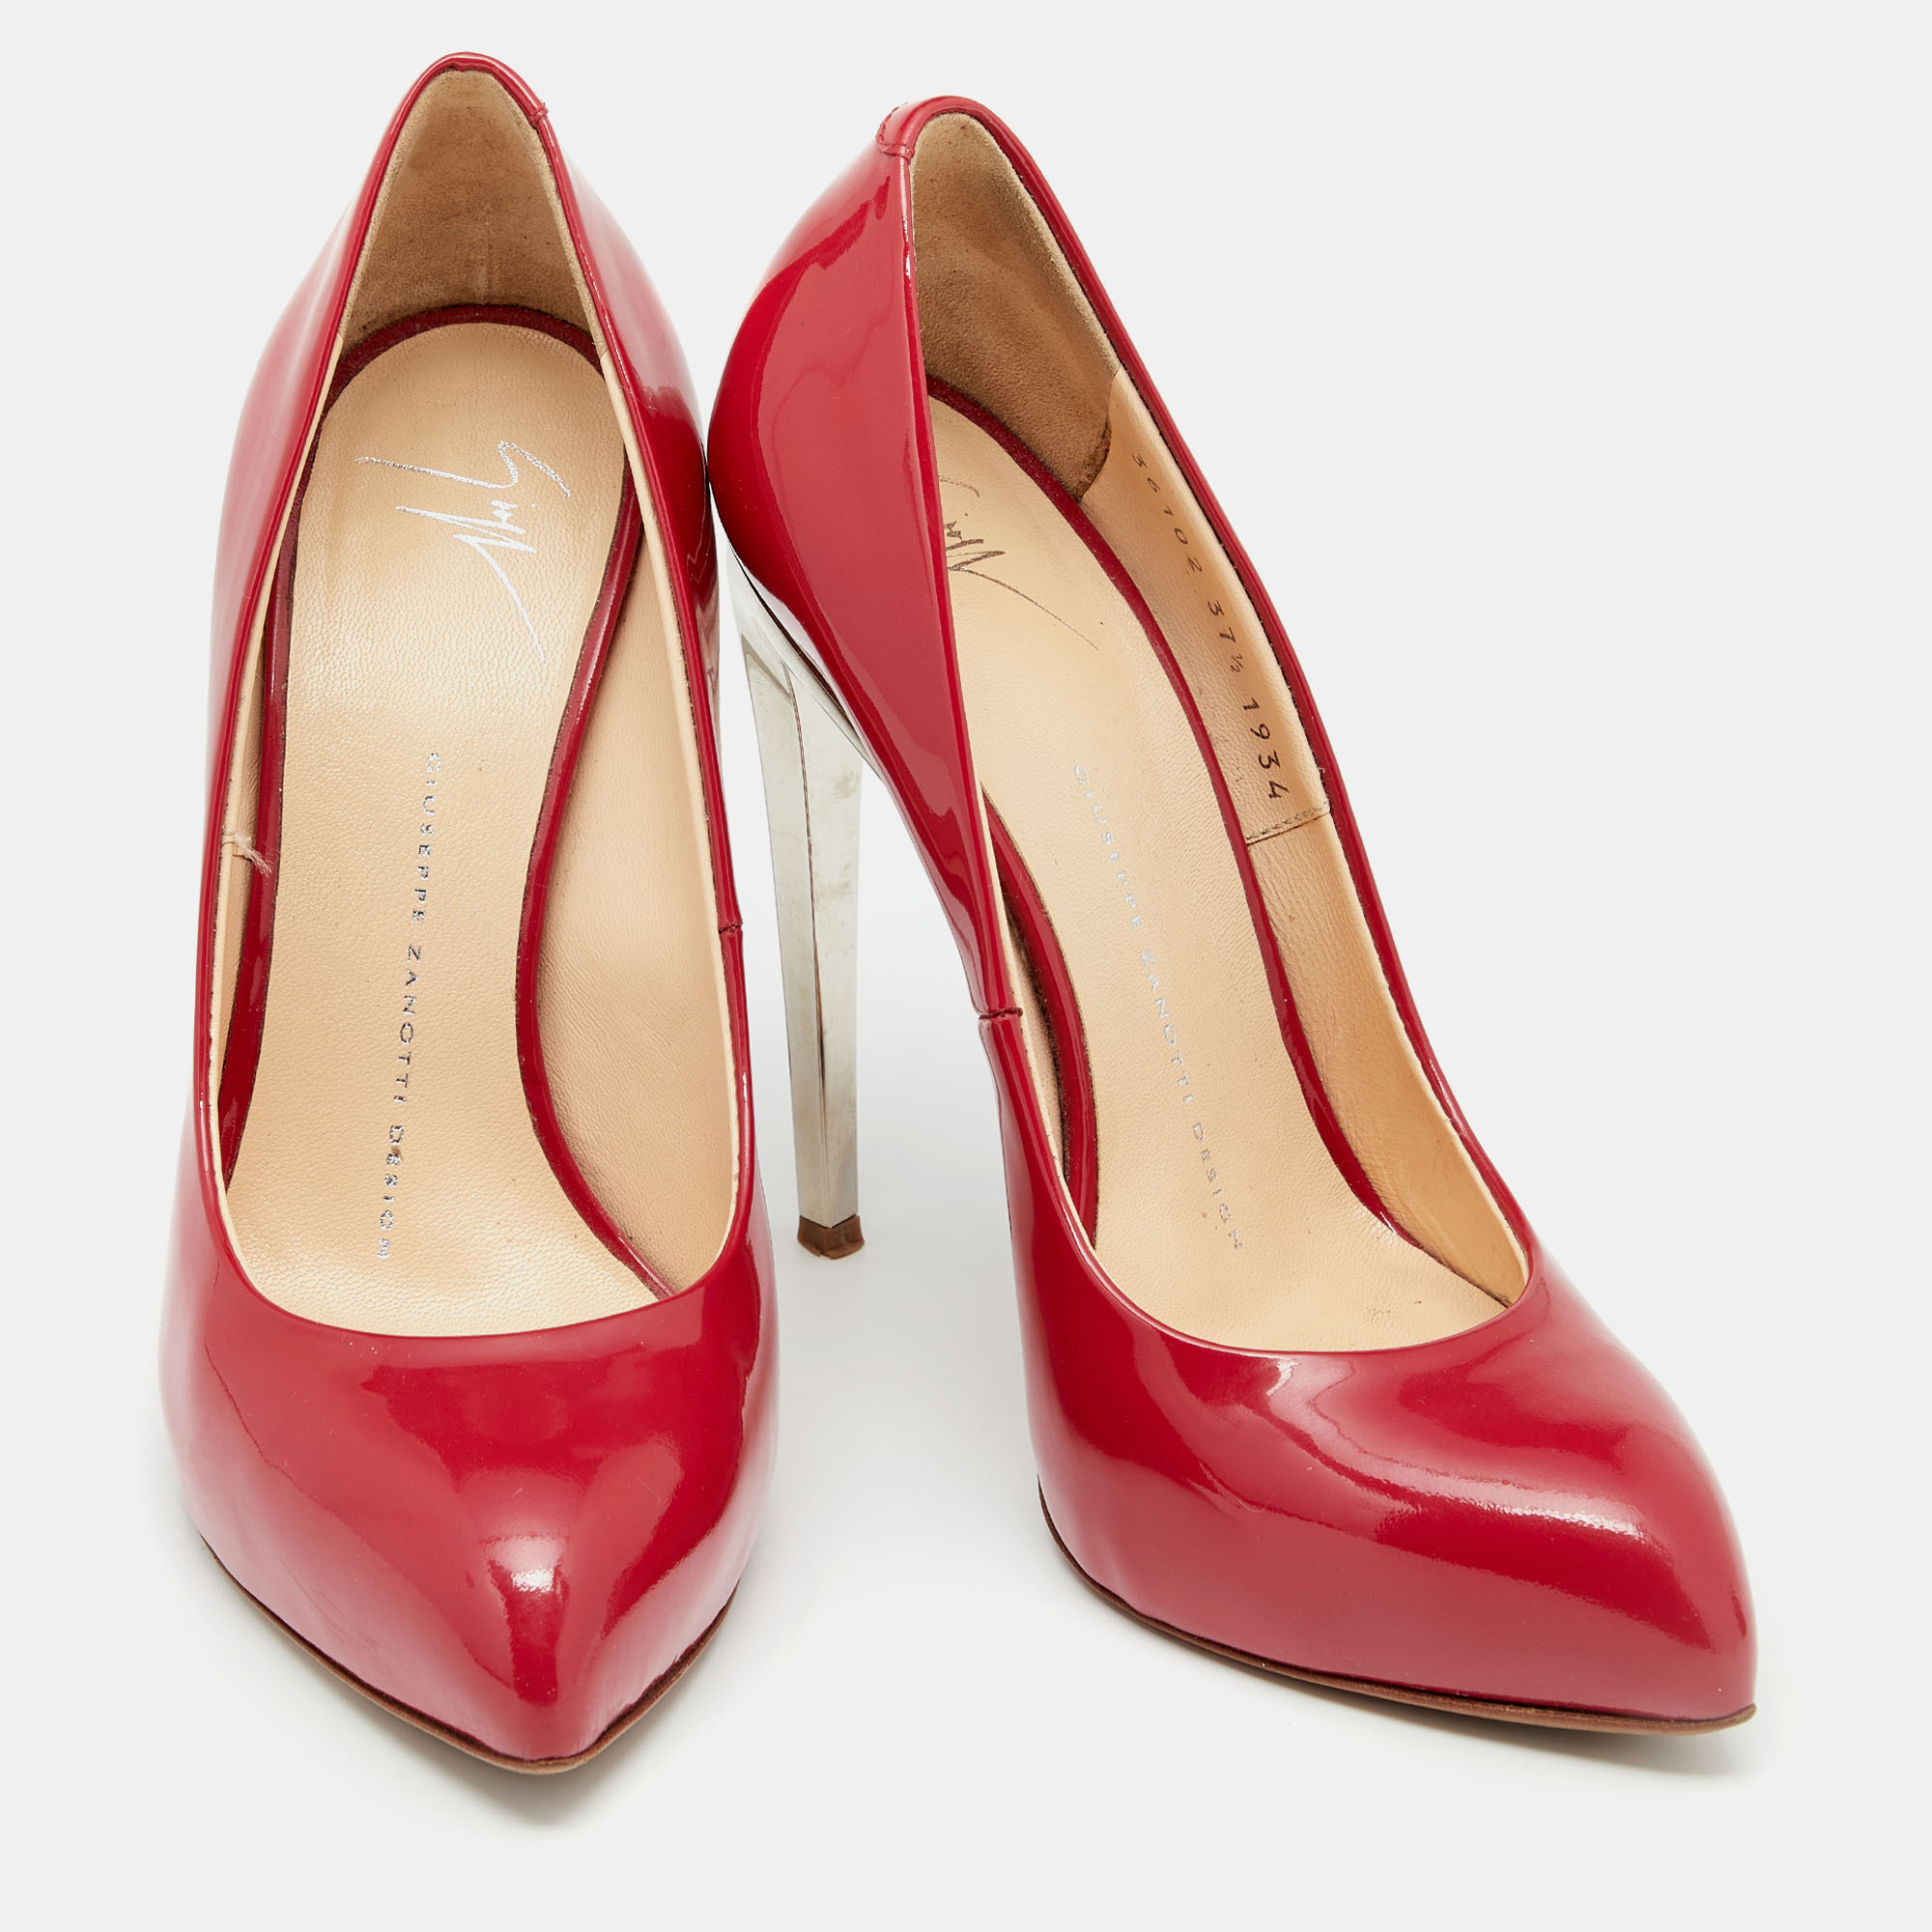 Giuseppe Zanotti Red Patent Leather Pointed Toe Pumps Size 37.5